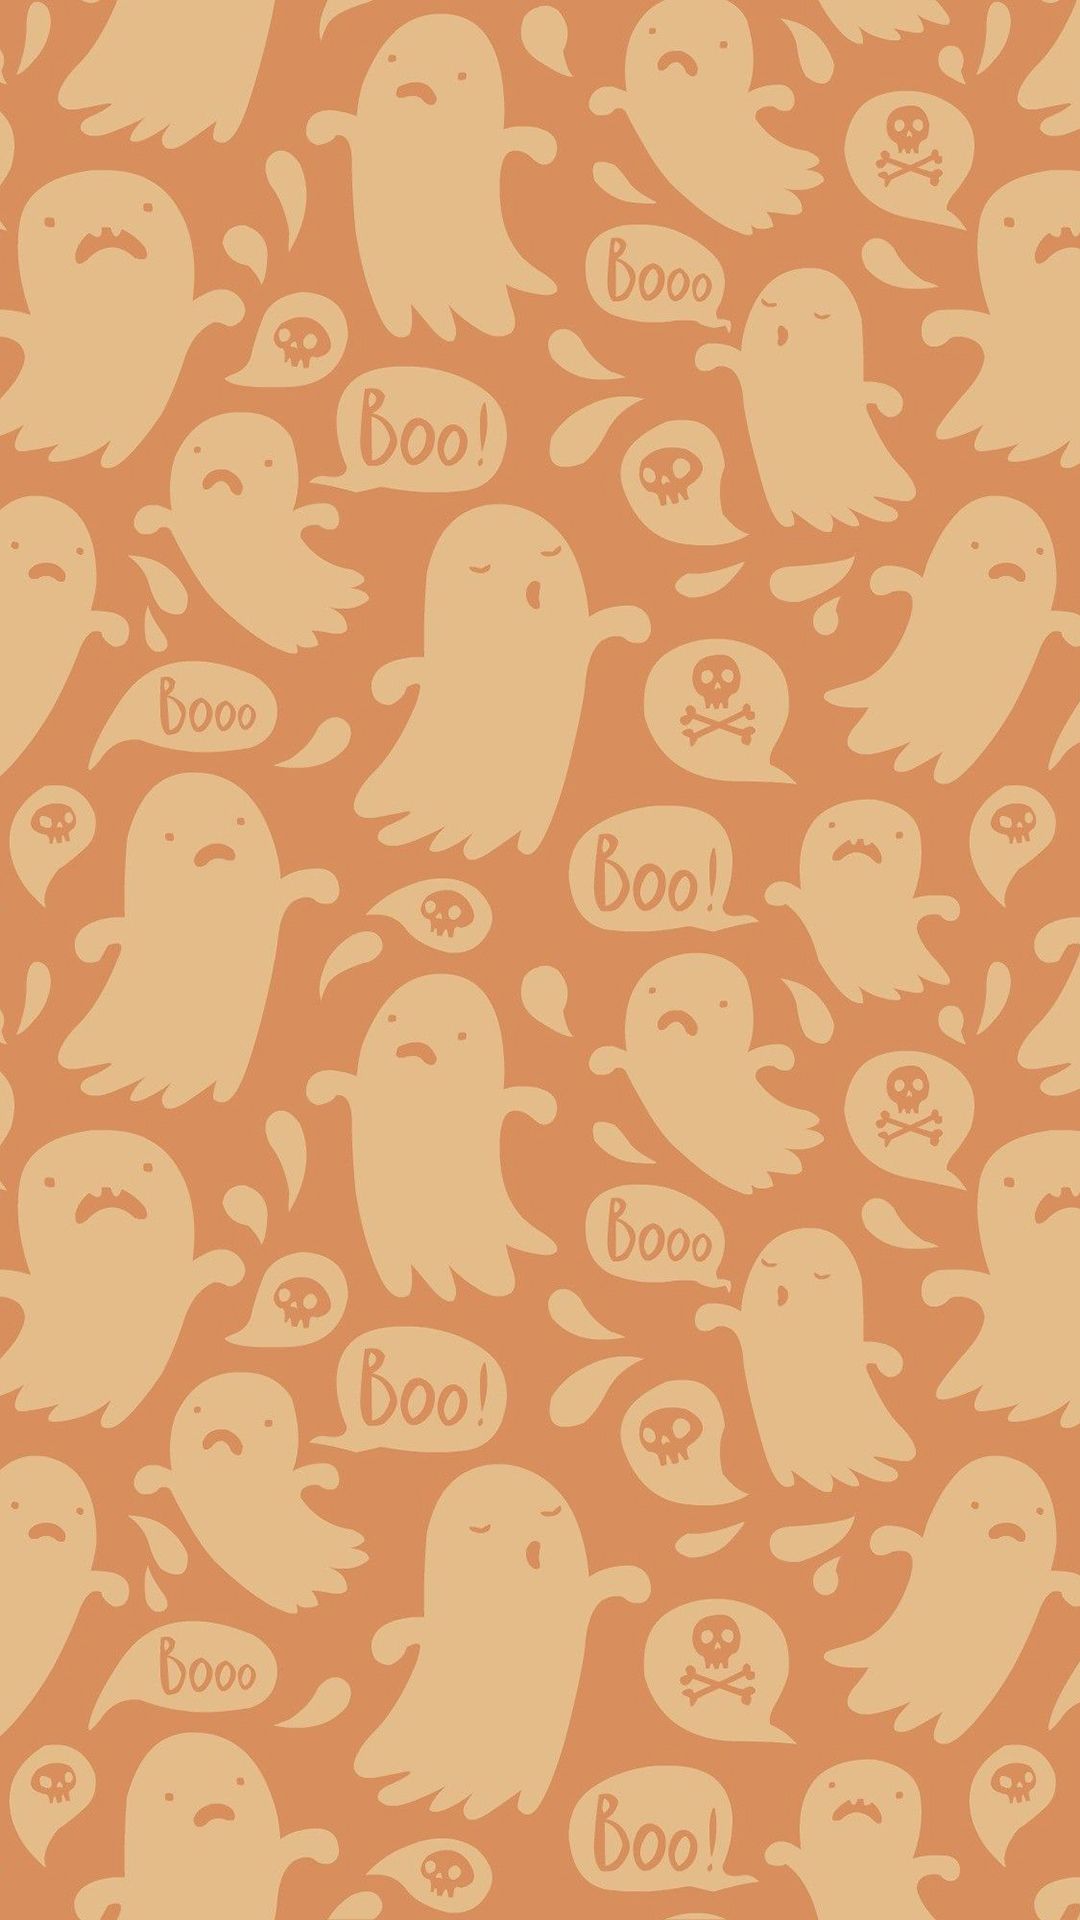 Cute Ghost Background Free Download